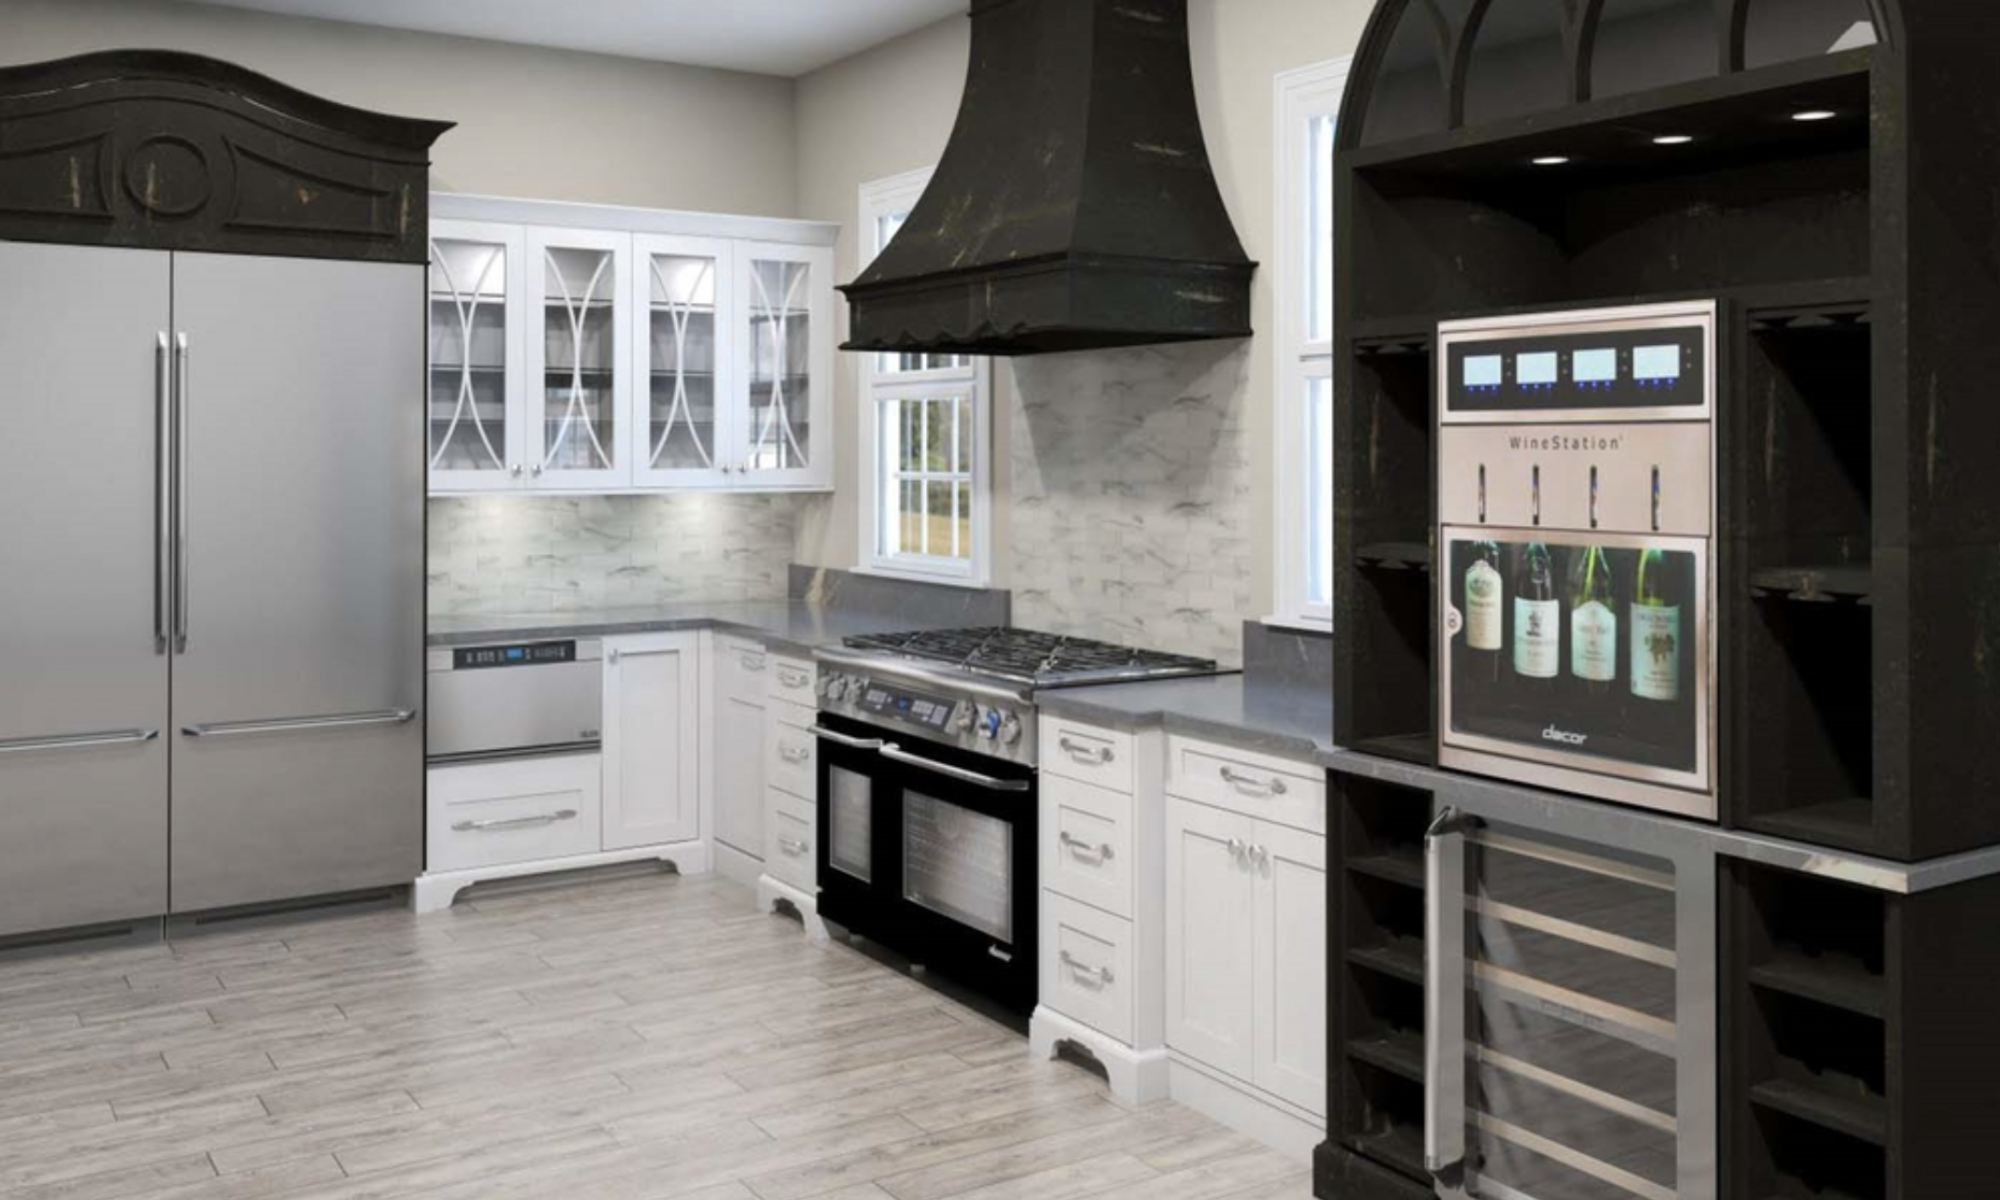 TIPLER DESIGN GROUP AND HABERSHAM HOME COLLABORATE ON TRANSITIONAL KITCHEN COLLECTION